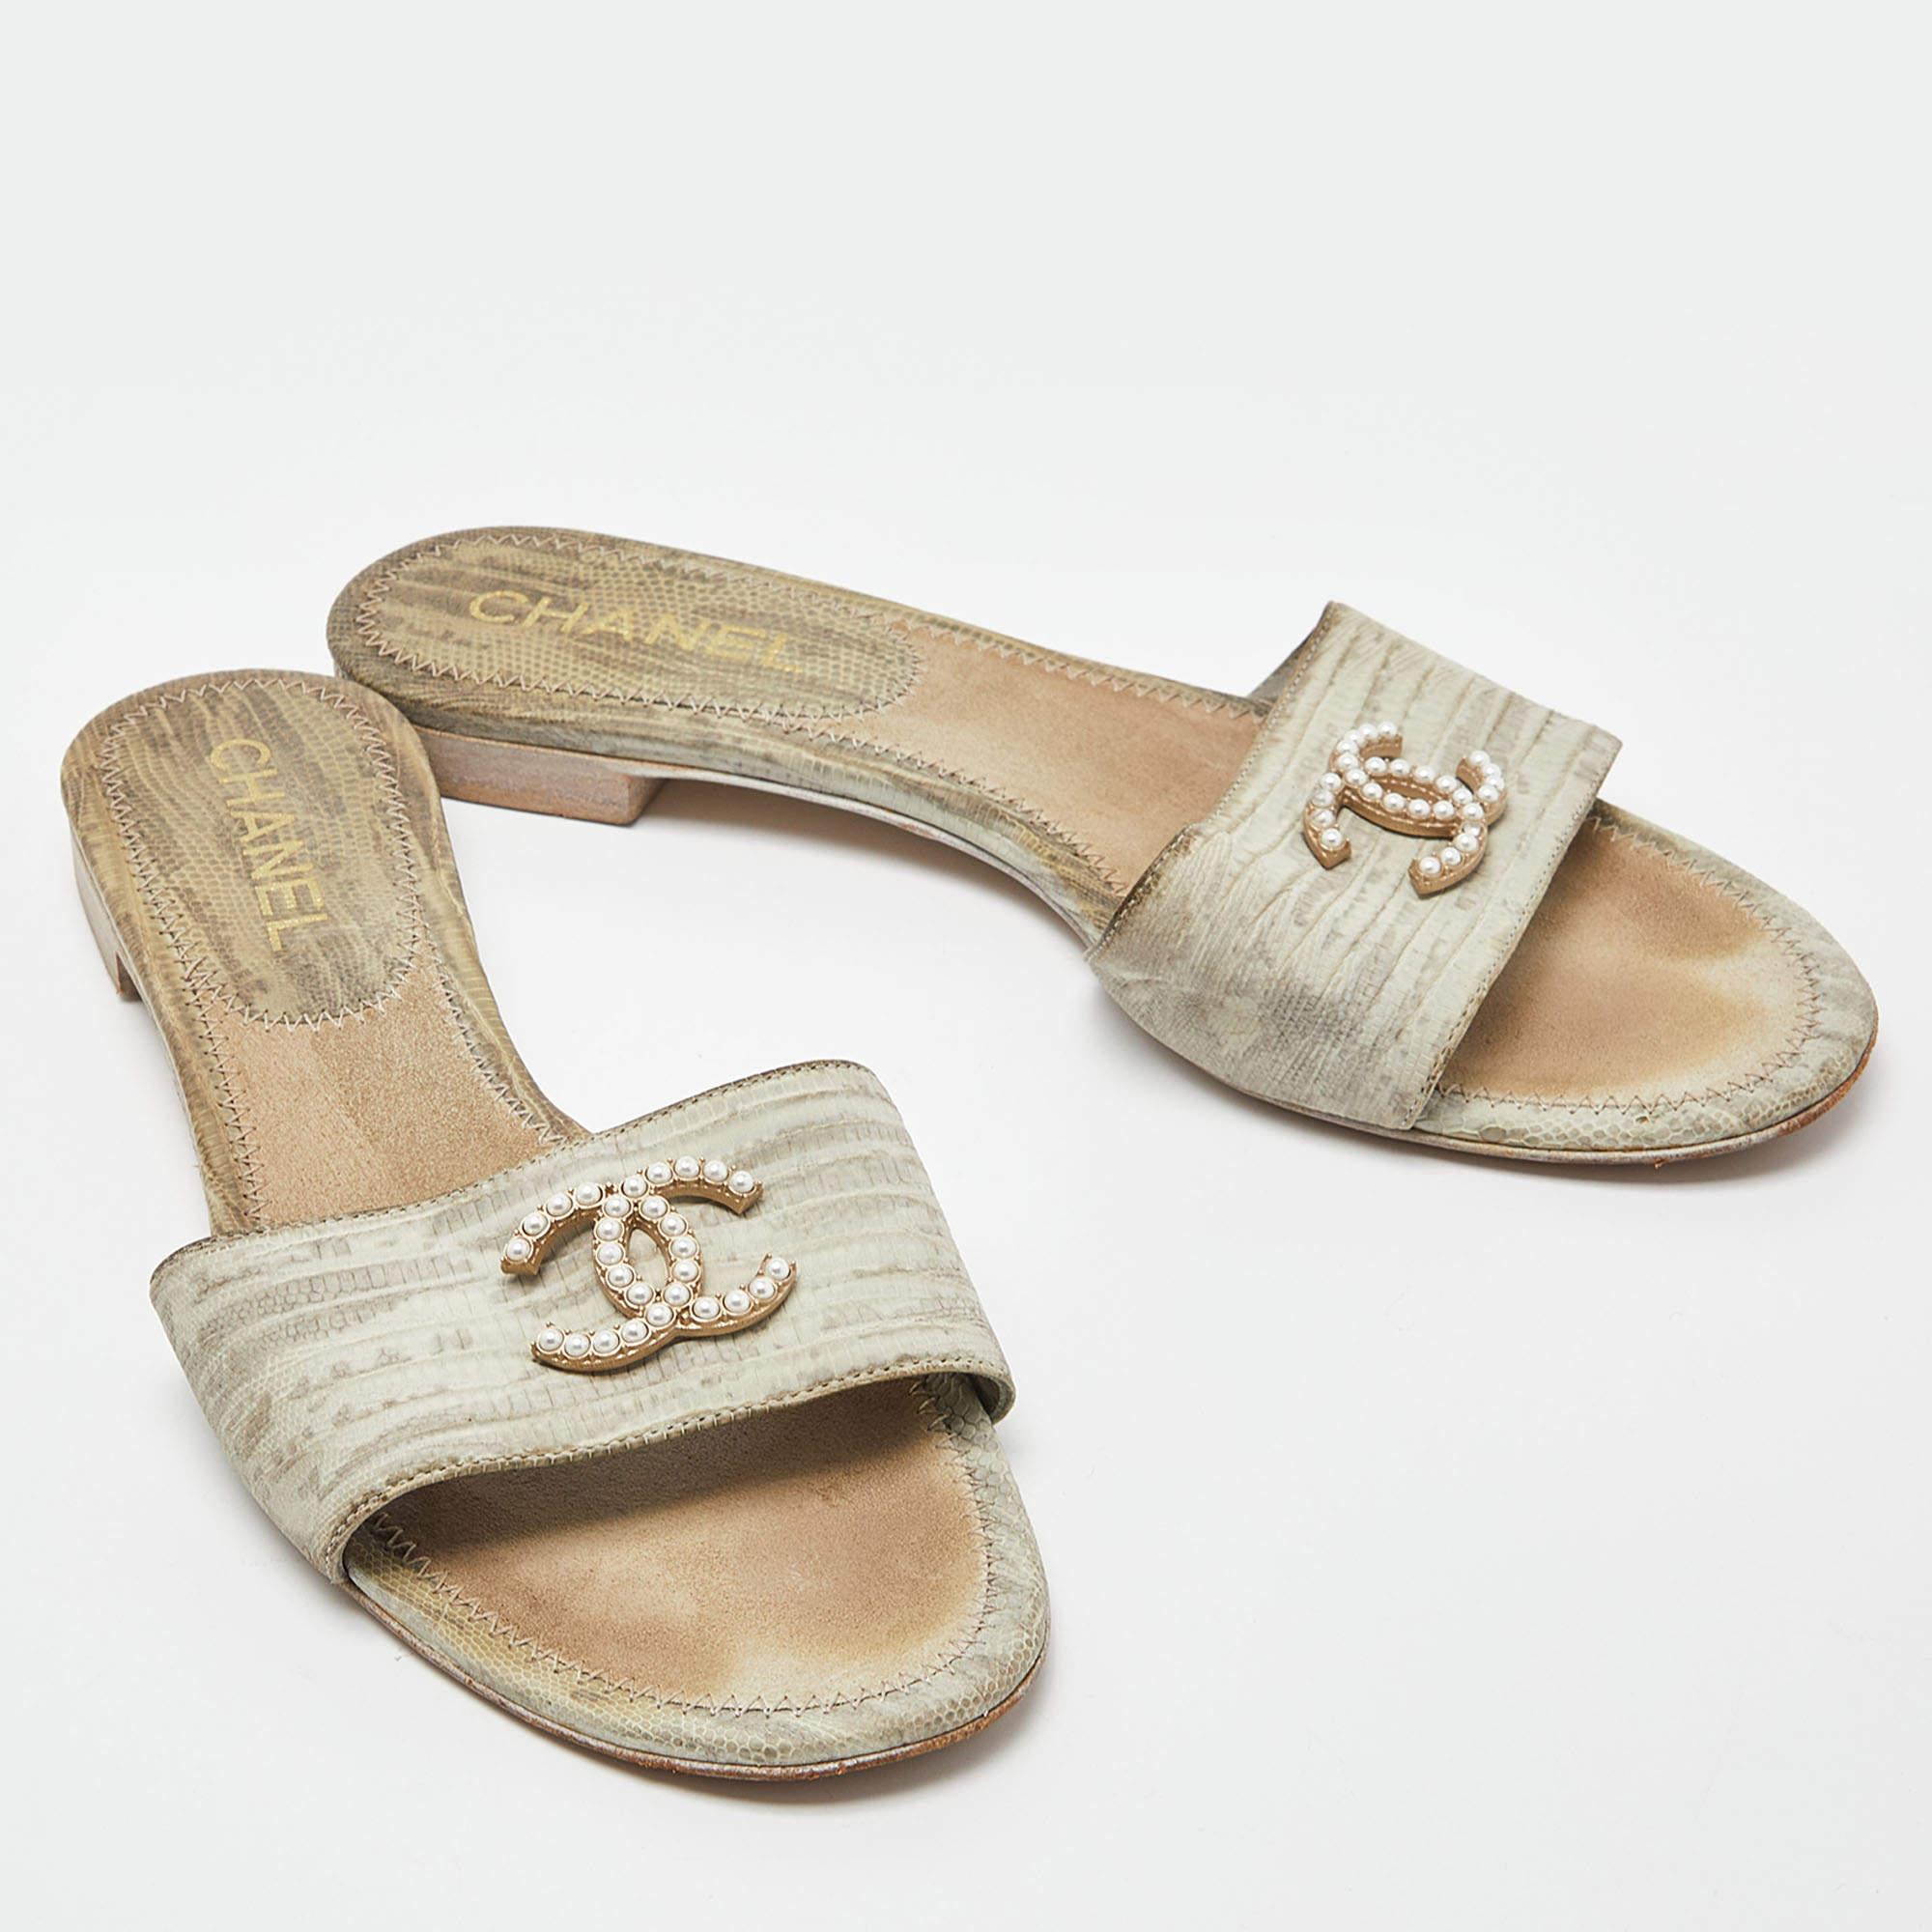 These Chanel flat slides are all about comfort and style! The design involves a CC-detailed pearl embellished upper crafted from lizard-embossed leather and durable leather sole for lasting wear. The slip-on style makes the pair convenient to use.

